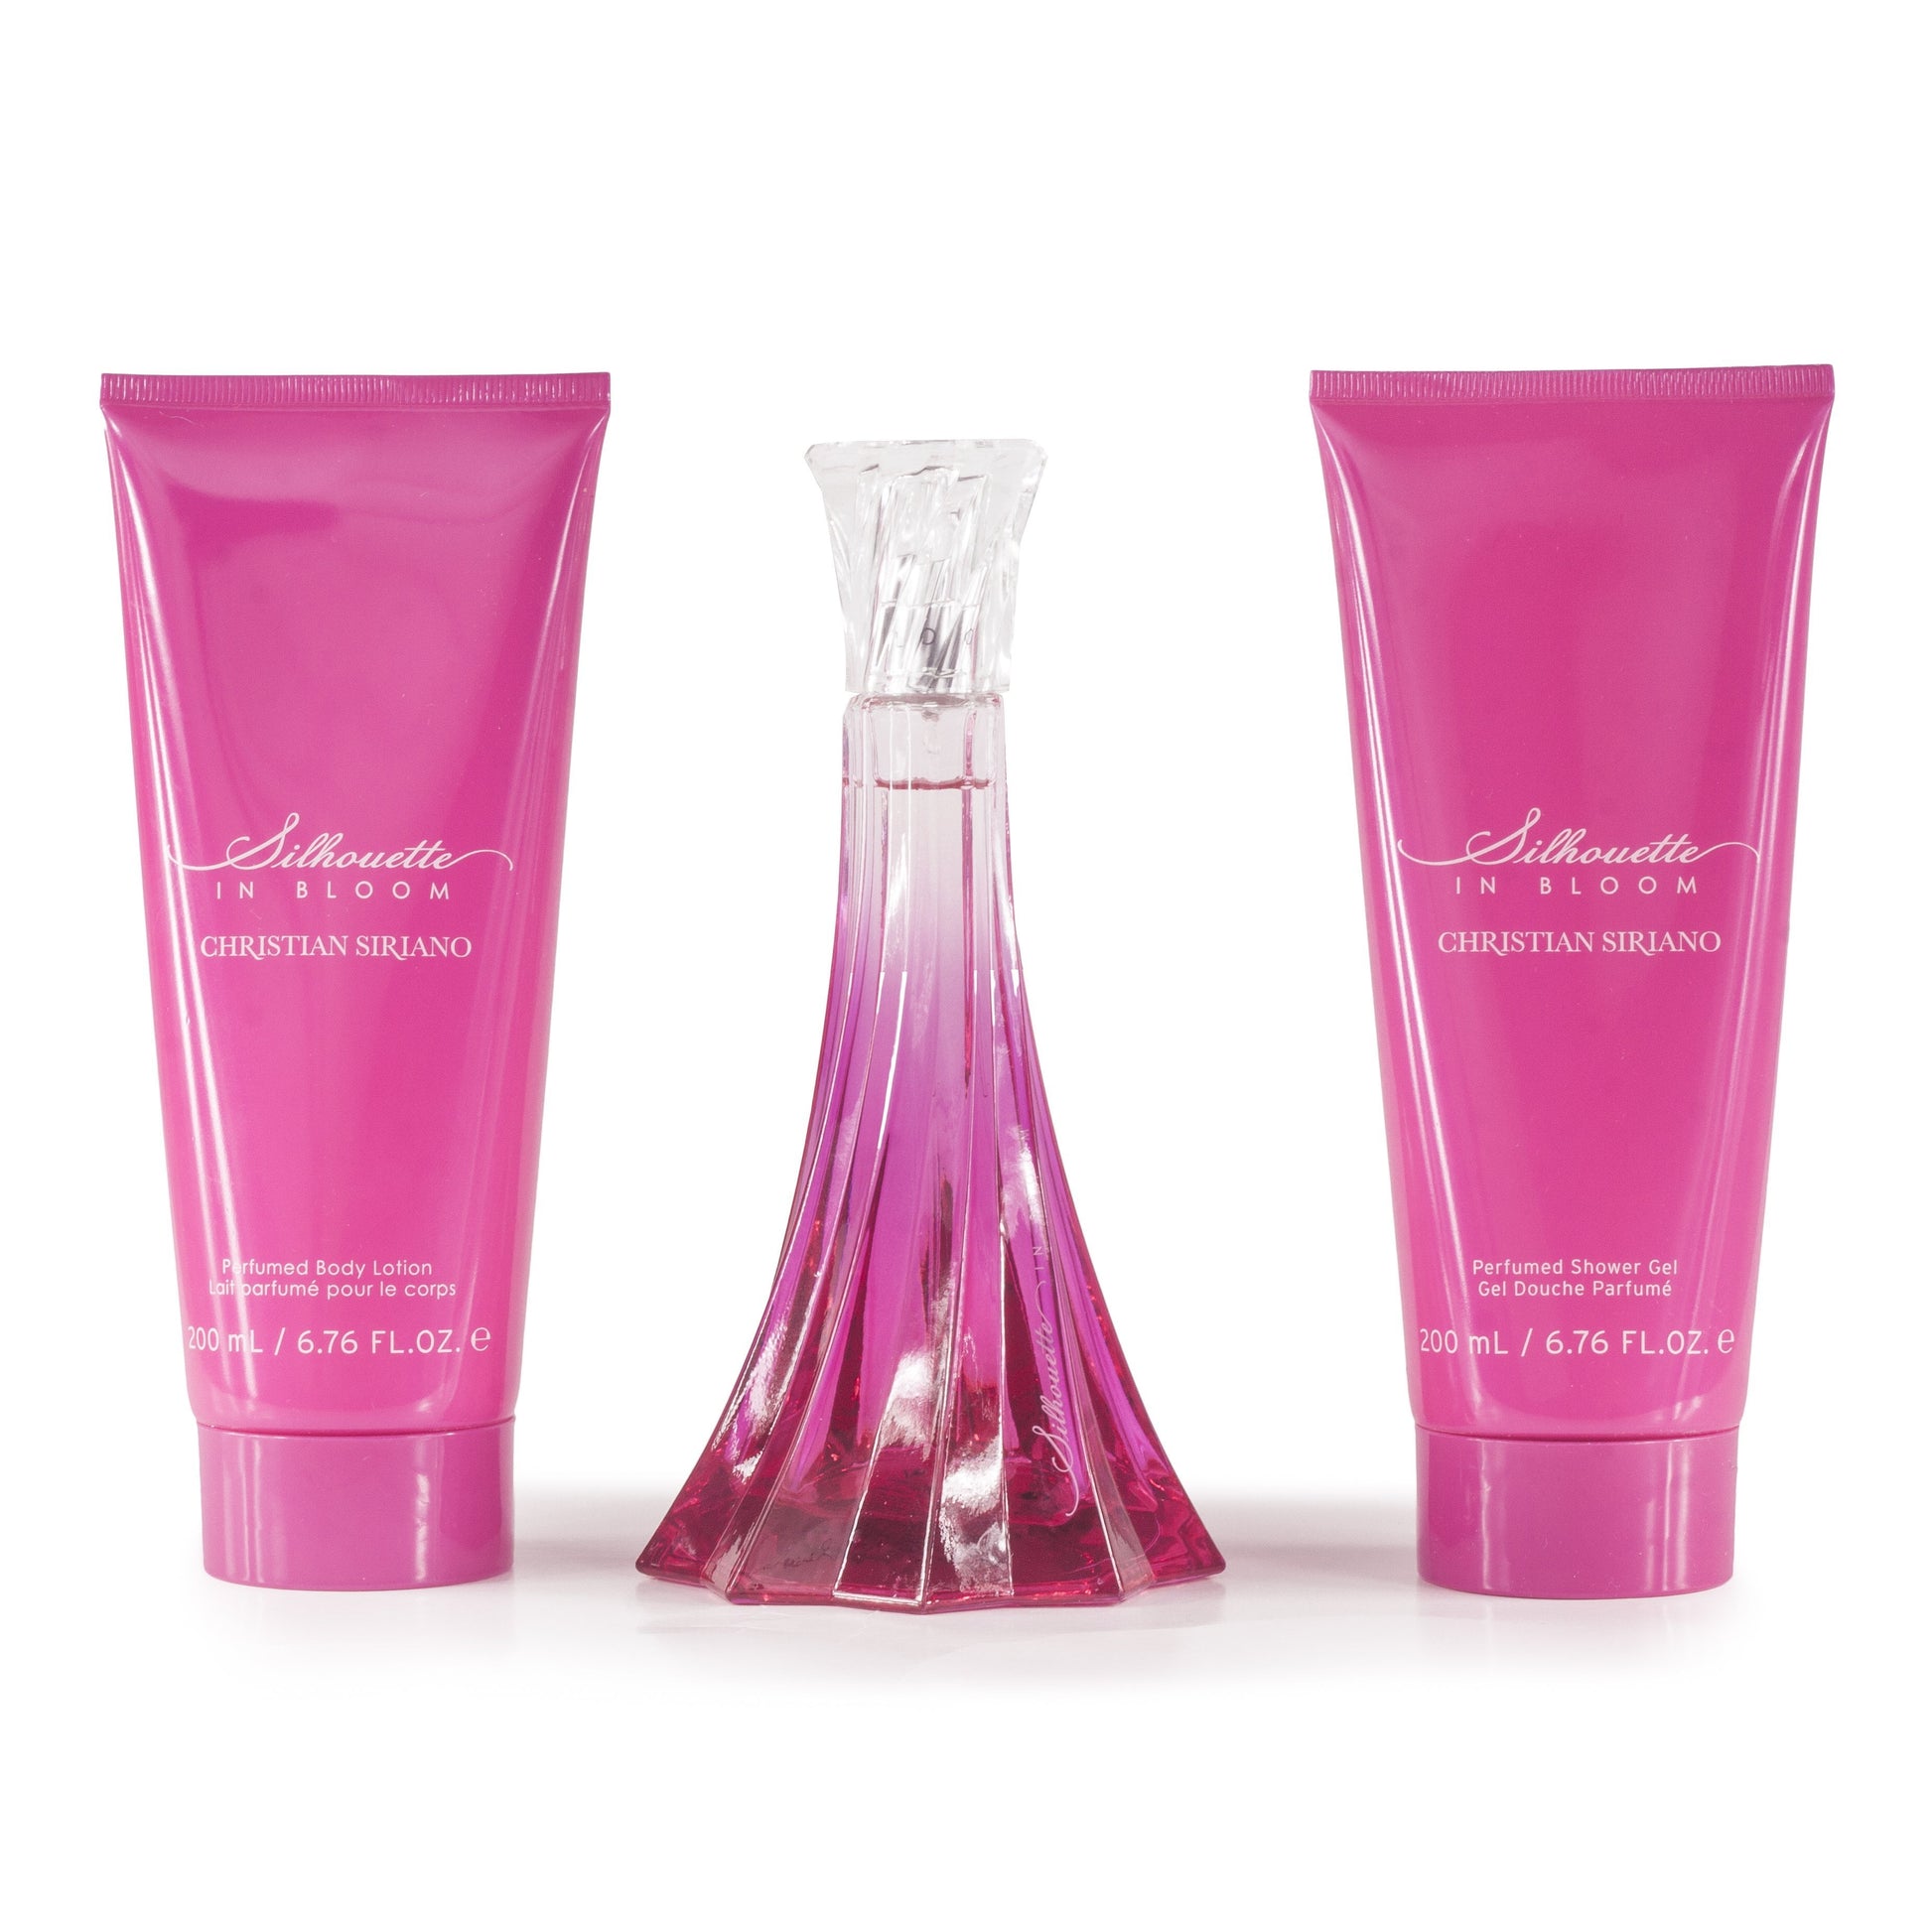 Silhouette in Bloom Gift Set for Women 3.4 oz. Click to open in modal